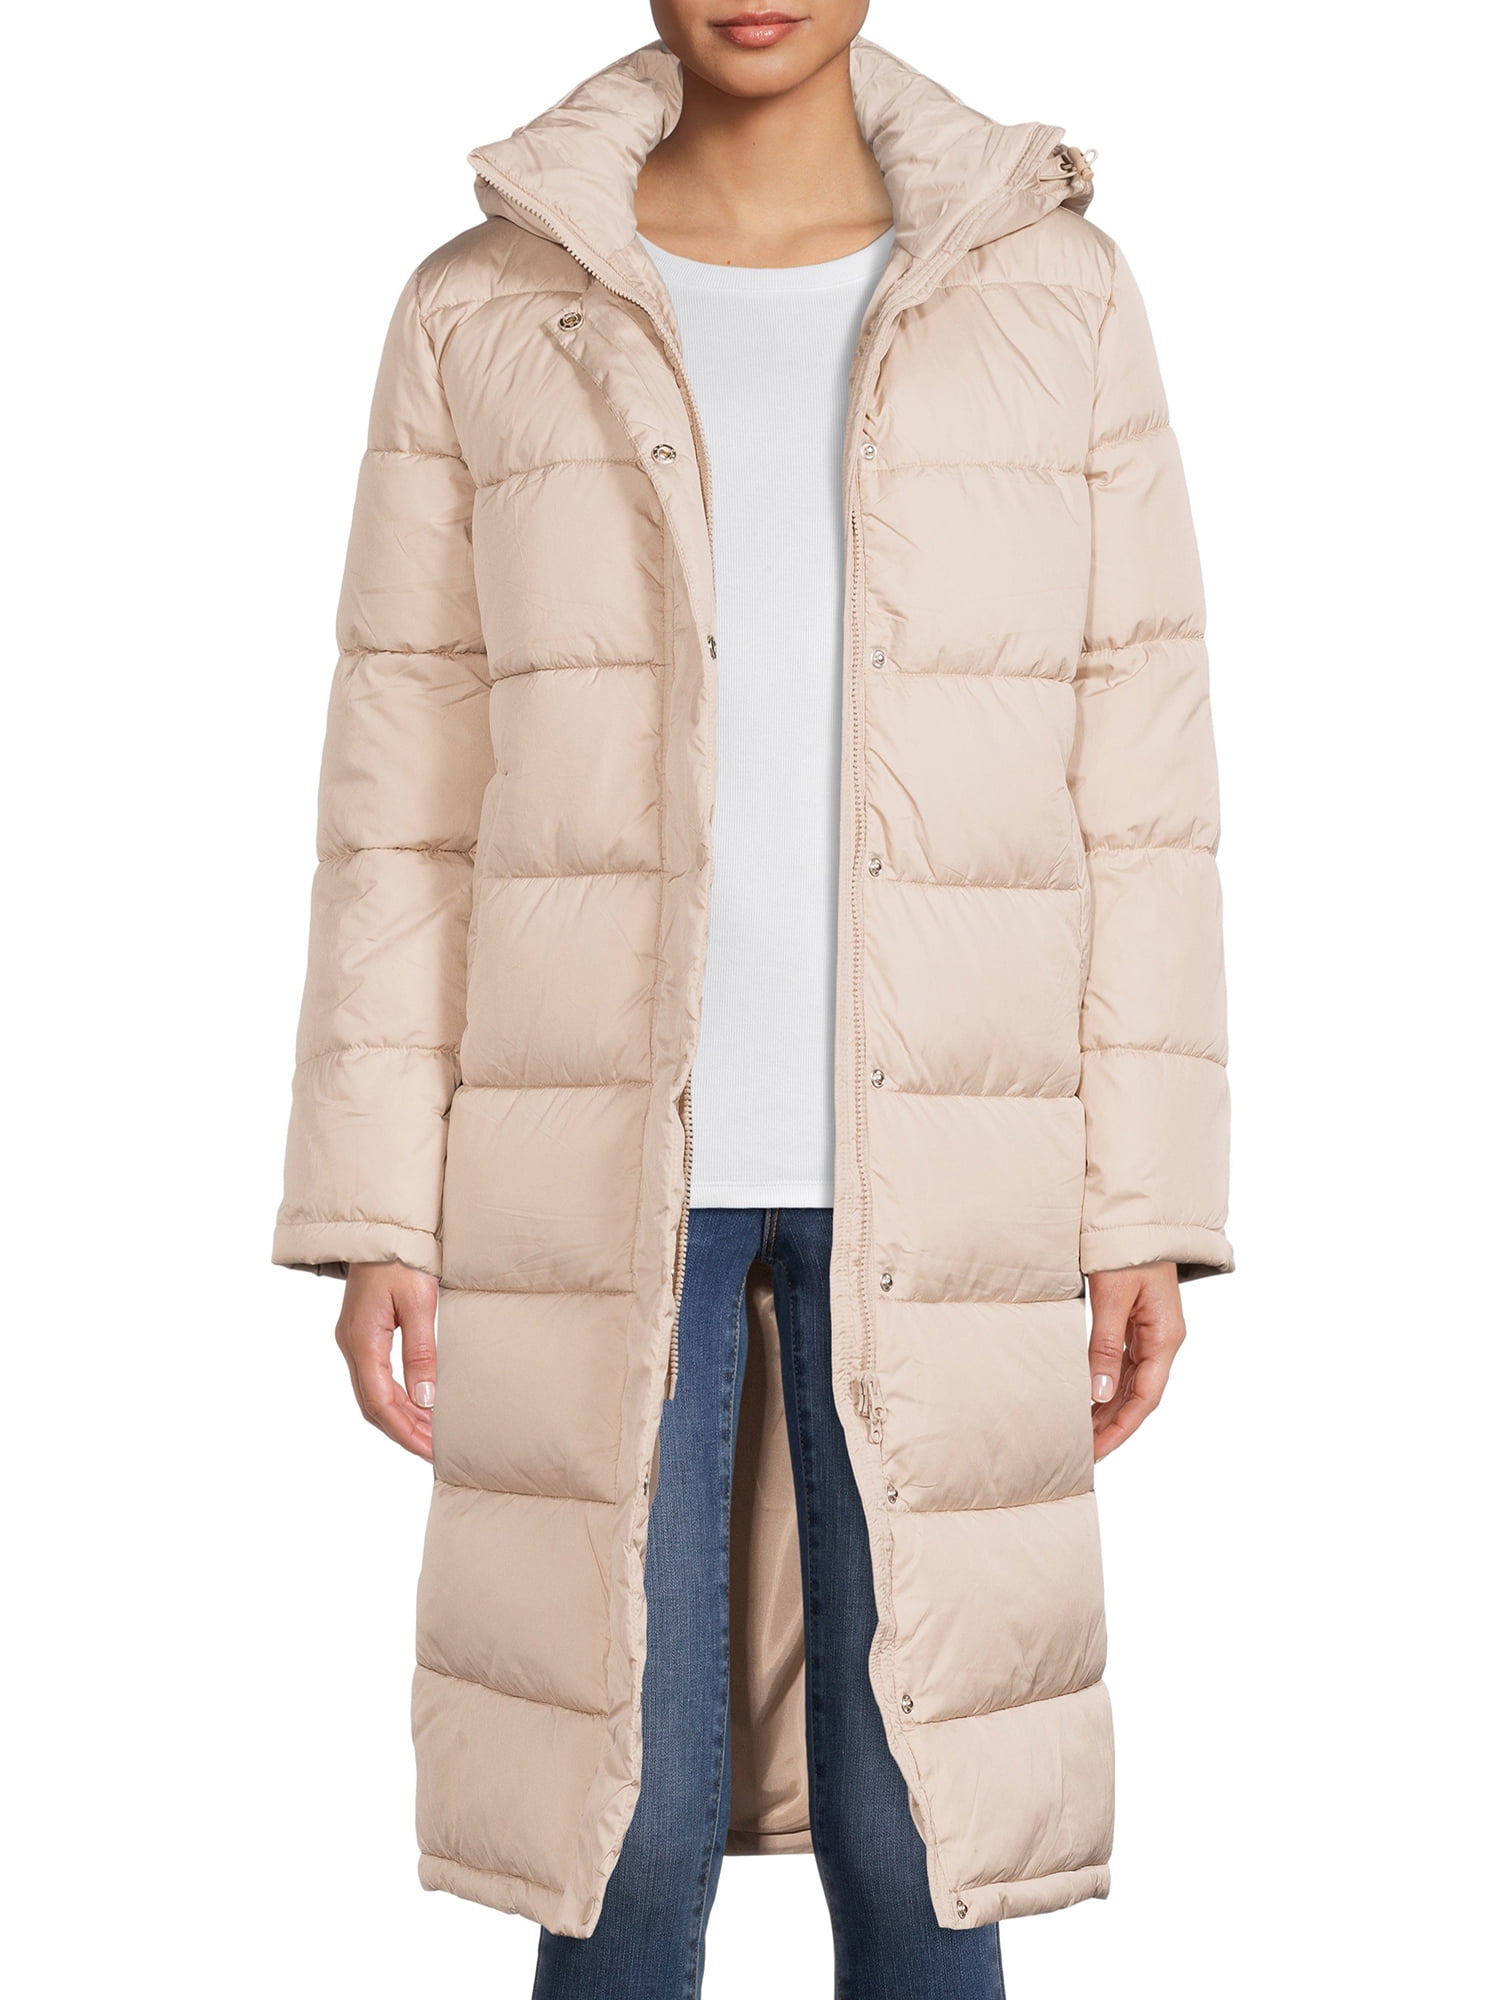 Tanming Womens Zip Cotton Padded Mid Long Puffer Coat Jacket with Detachable Hood